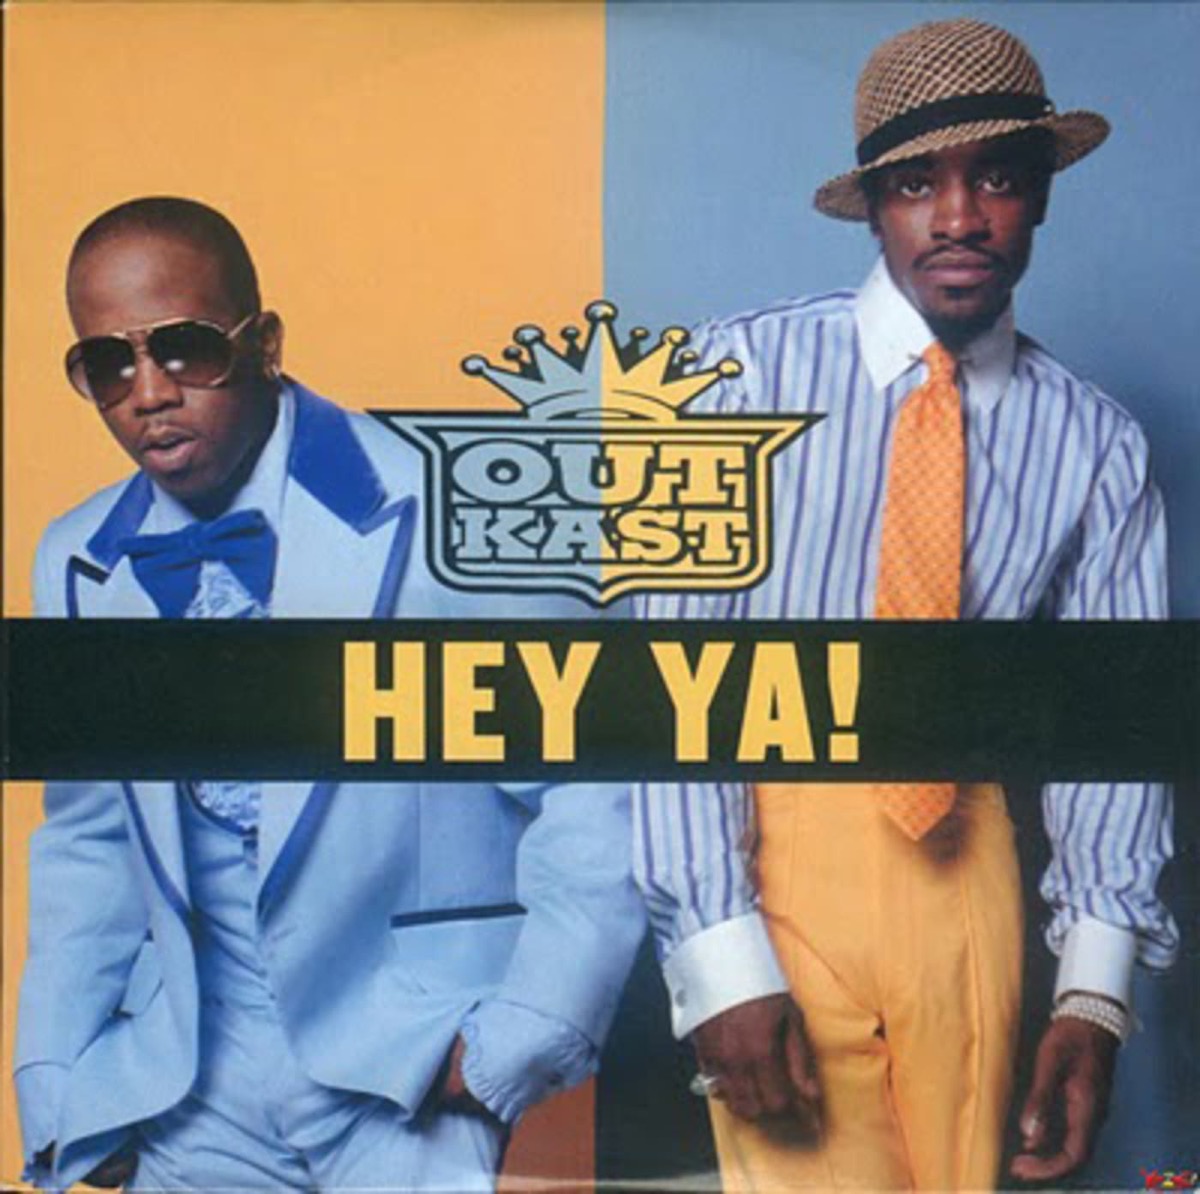 Single cover art for "Hey Ya!" by Outkast